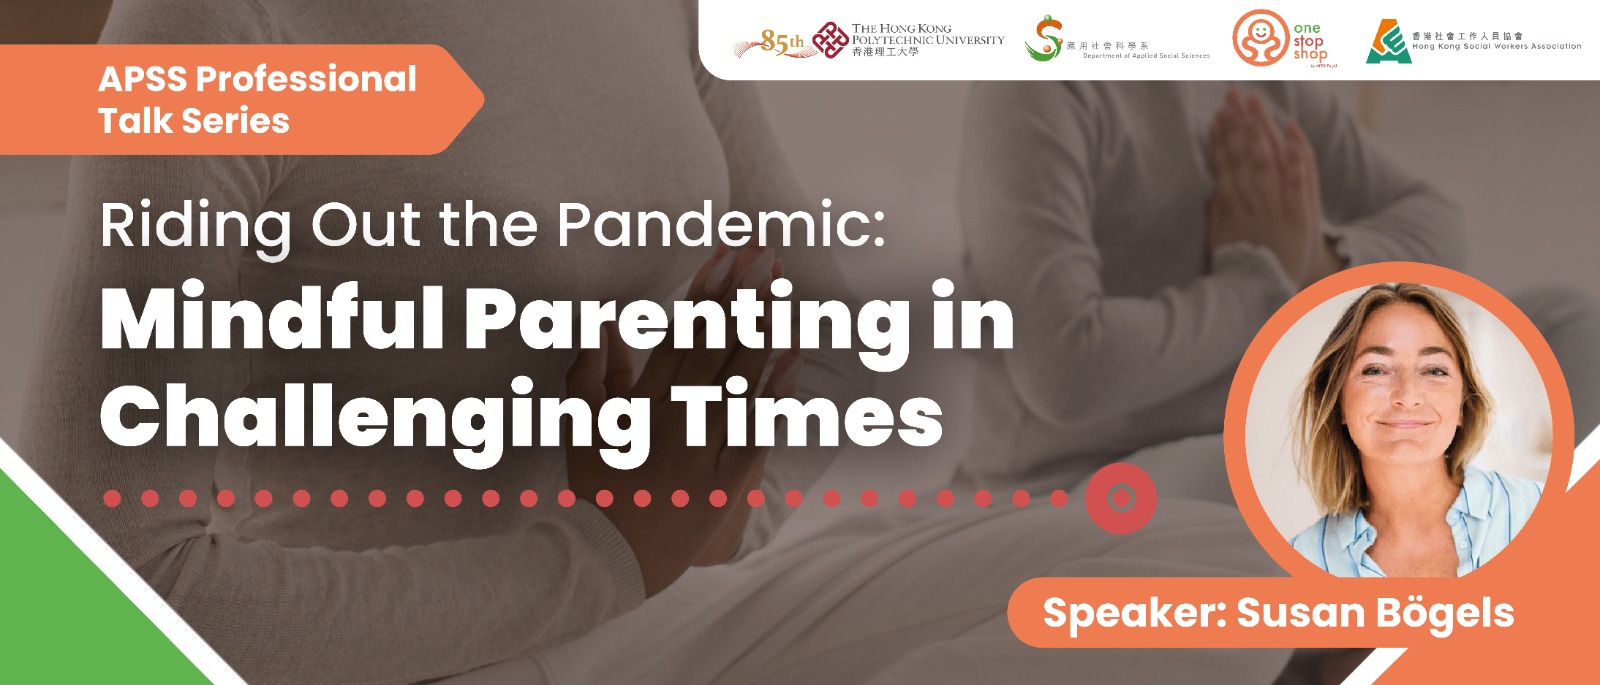 Riding Out the Pandemic: Mindful Parenting in Challenging Times